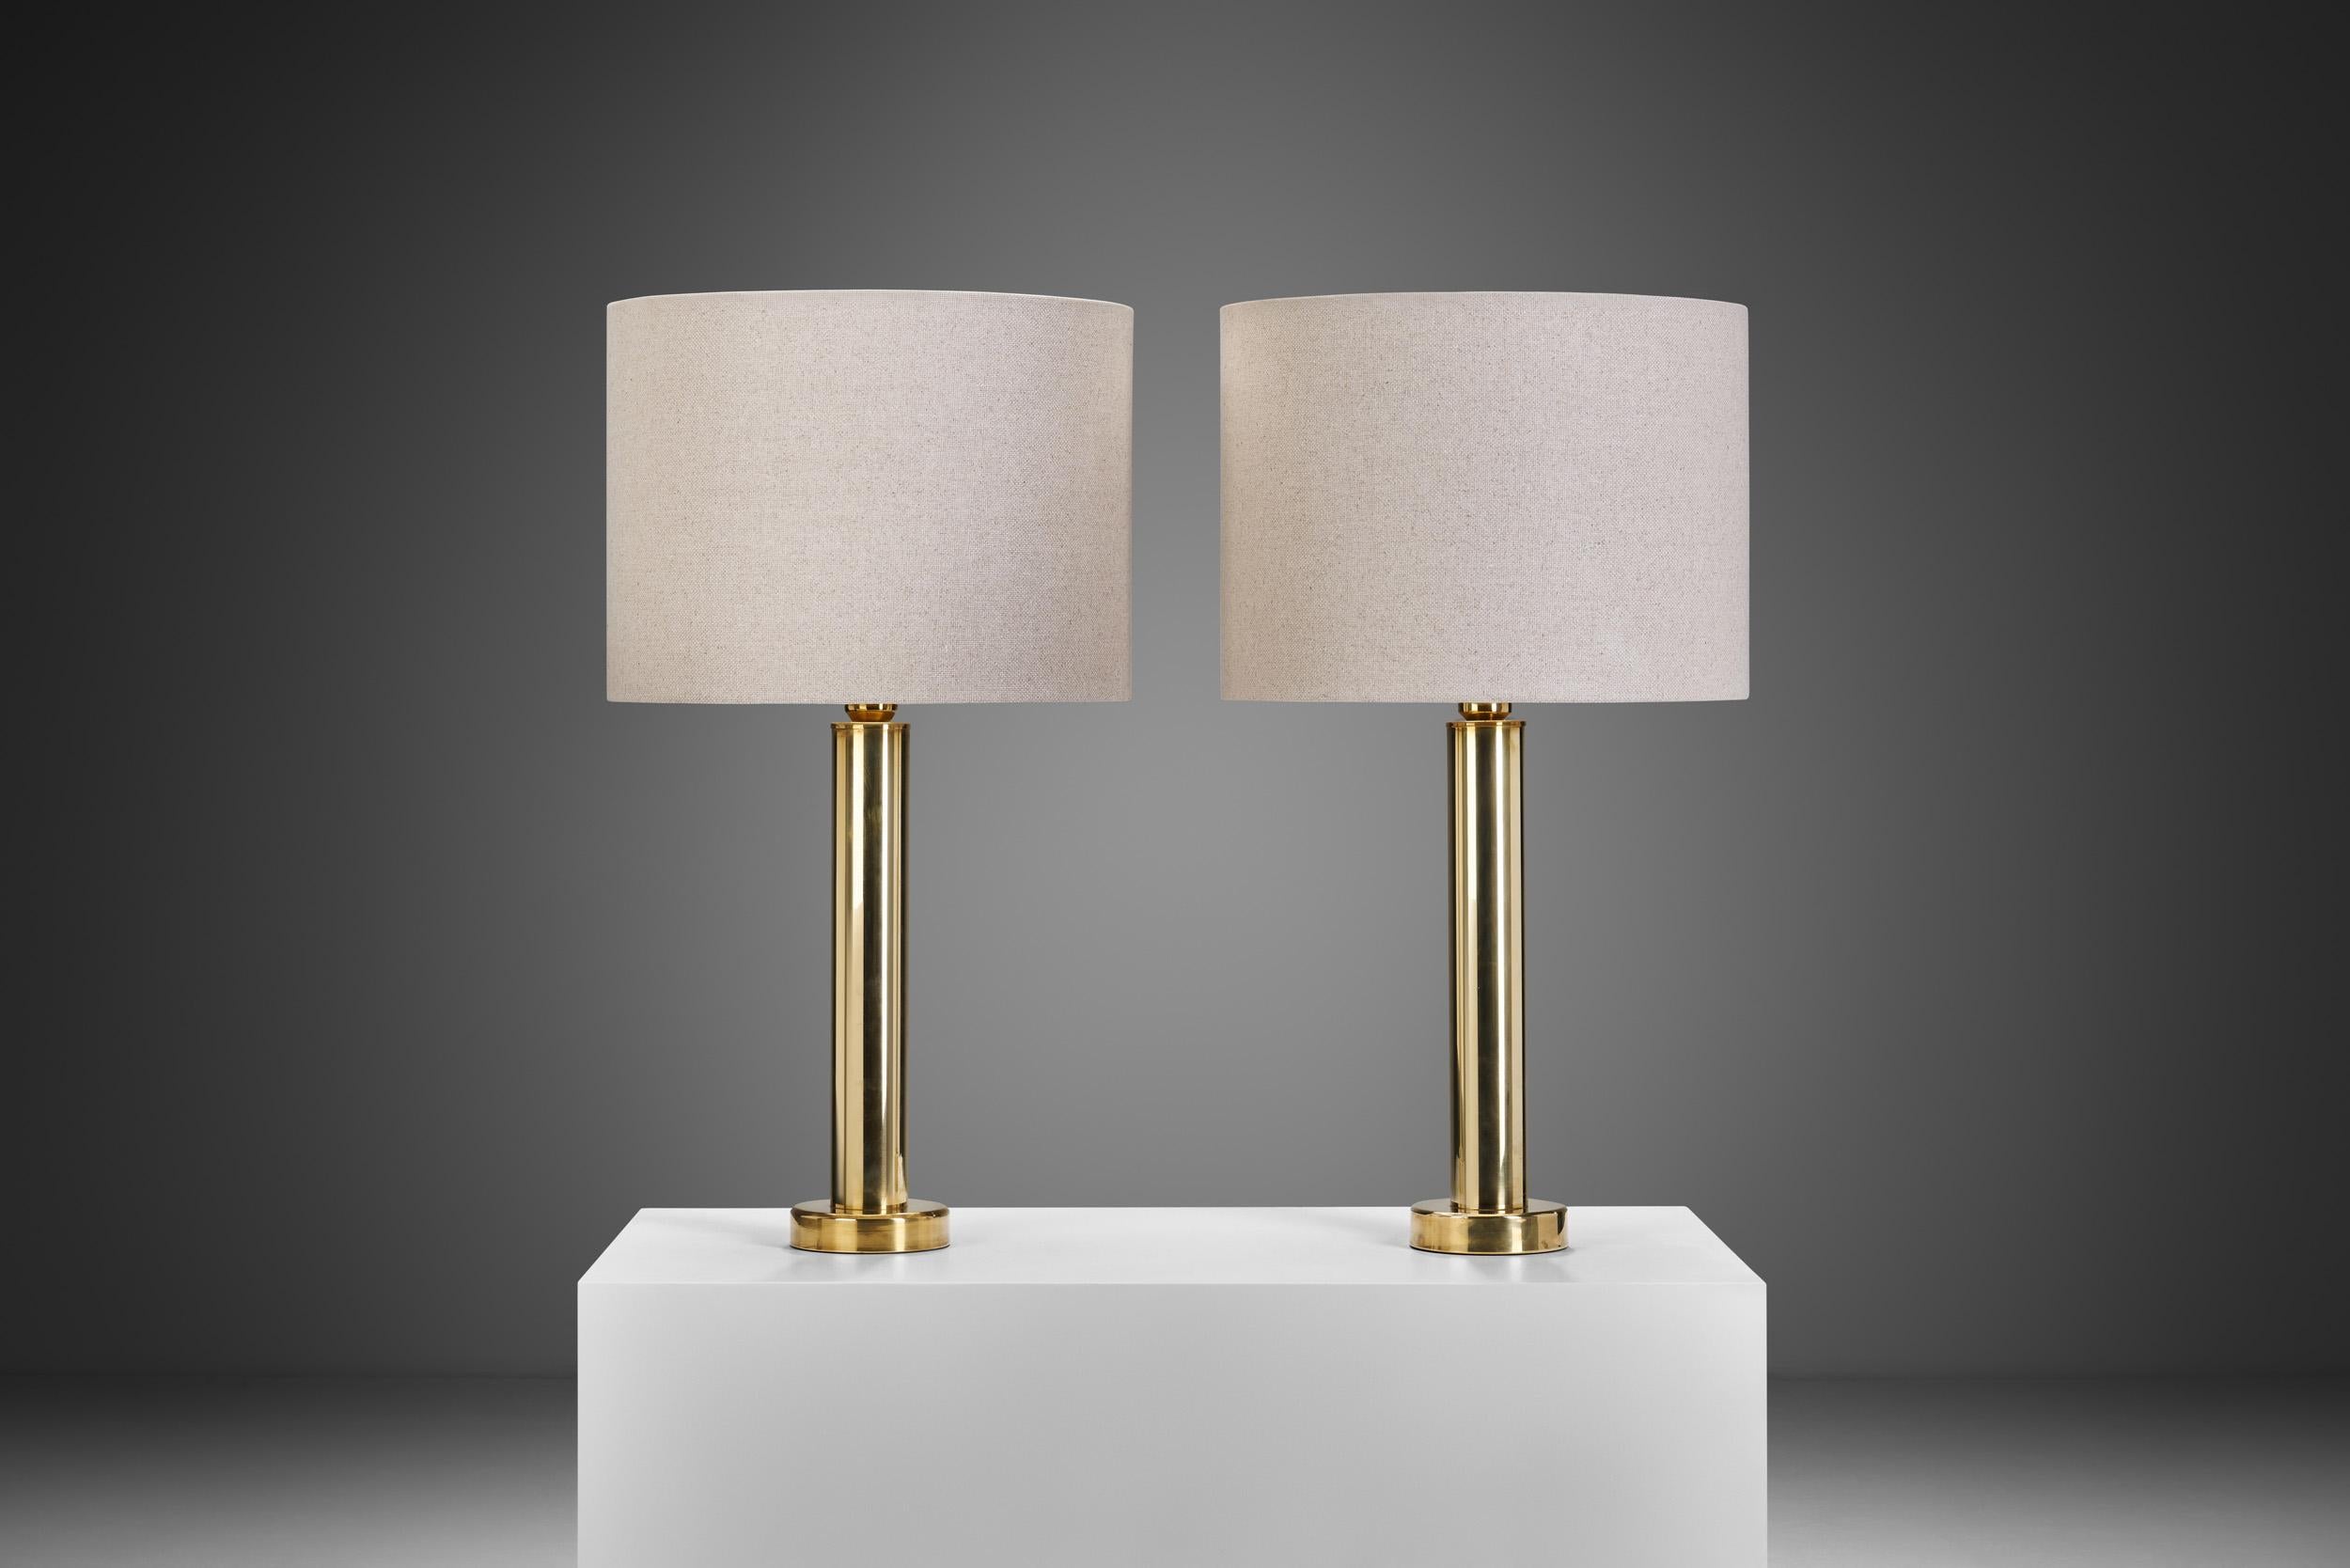 Large Swedish Modern Brass Table Lamps by Kosta Elarmatur, Sweden ca 1960s For Sale 2